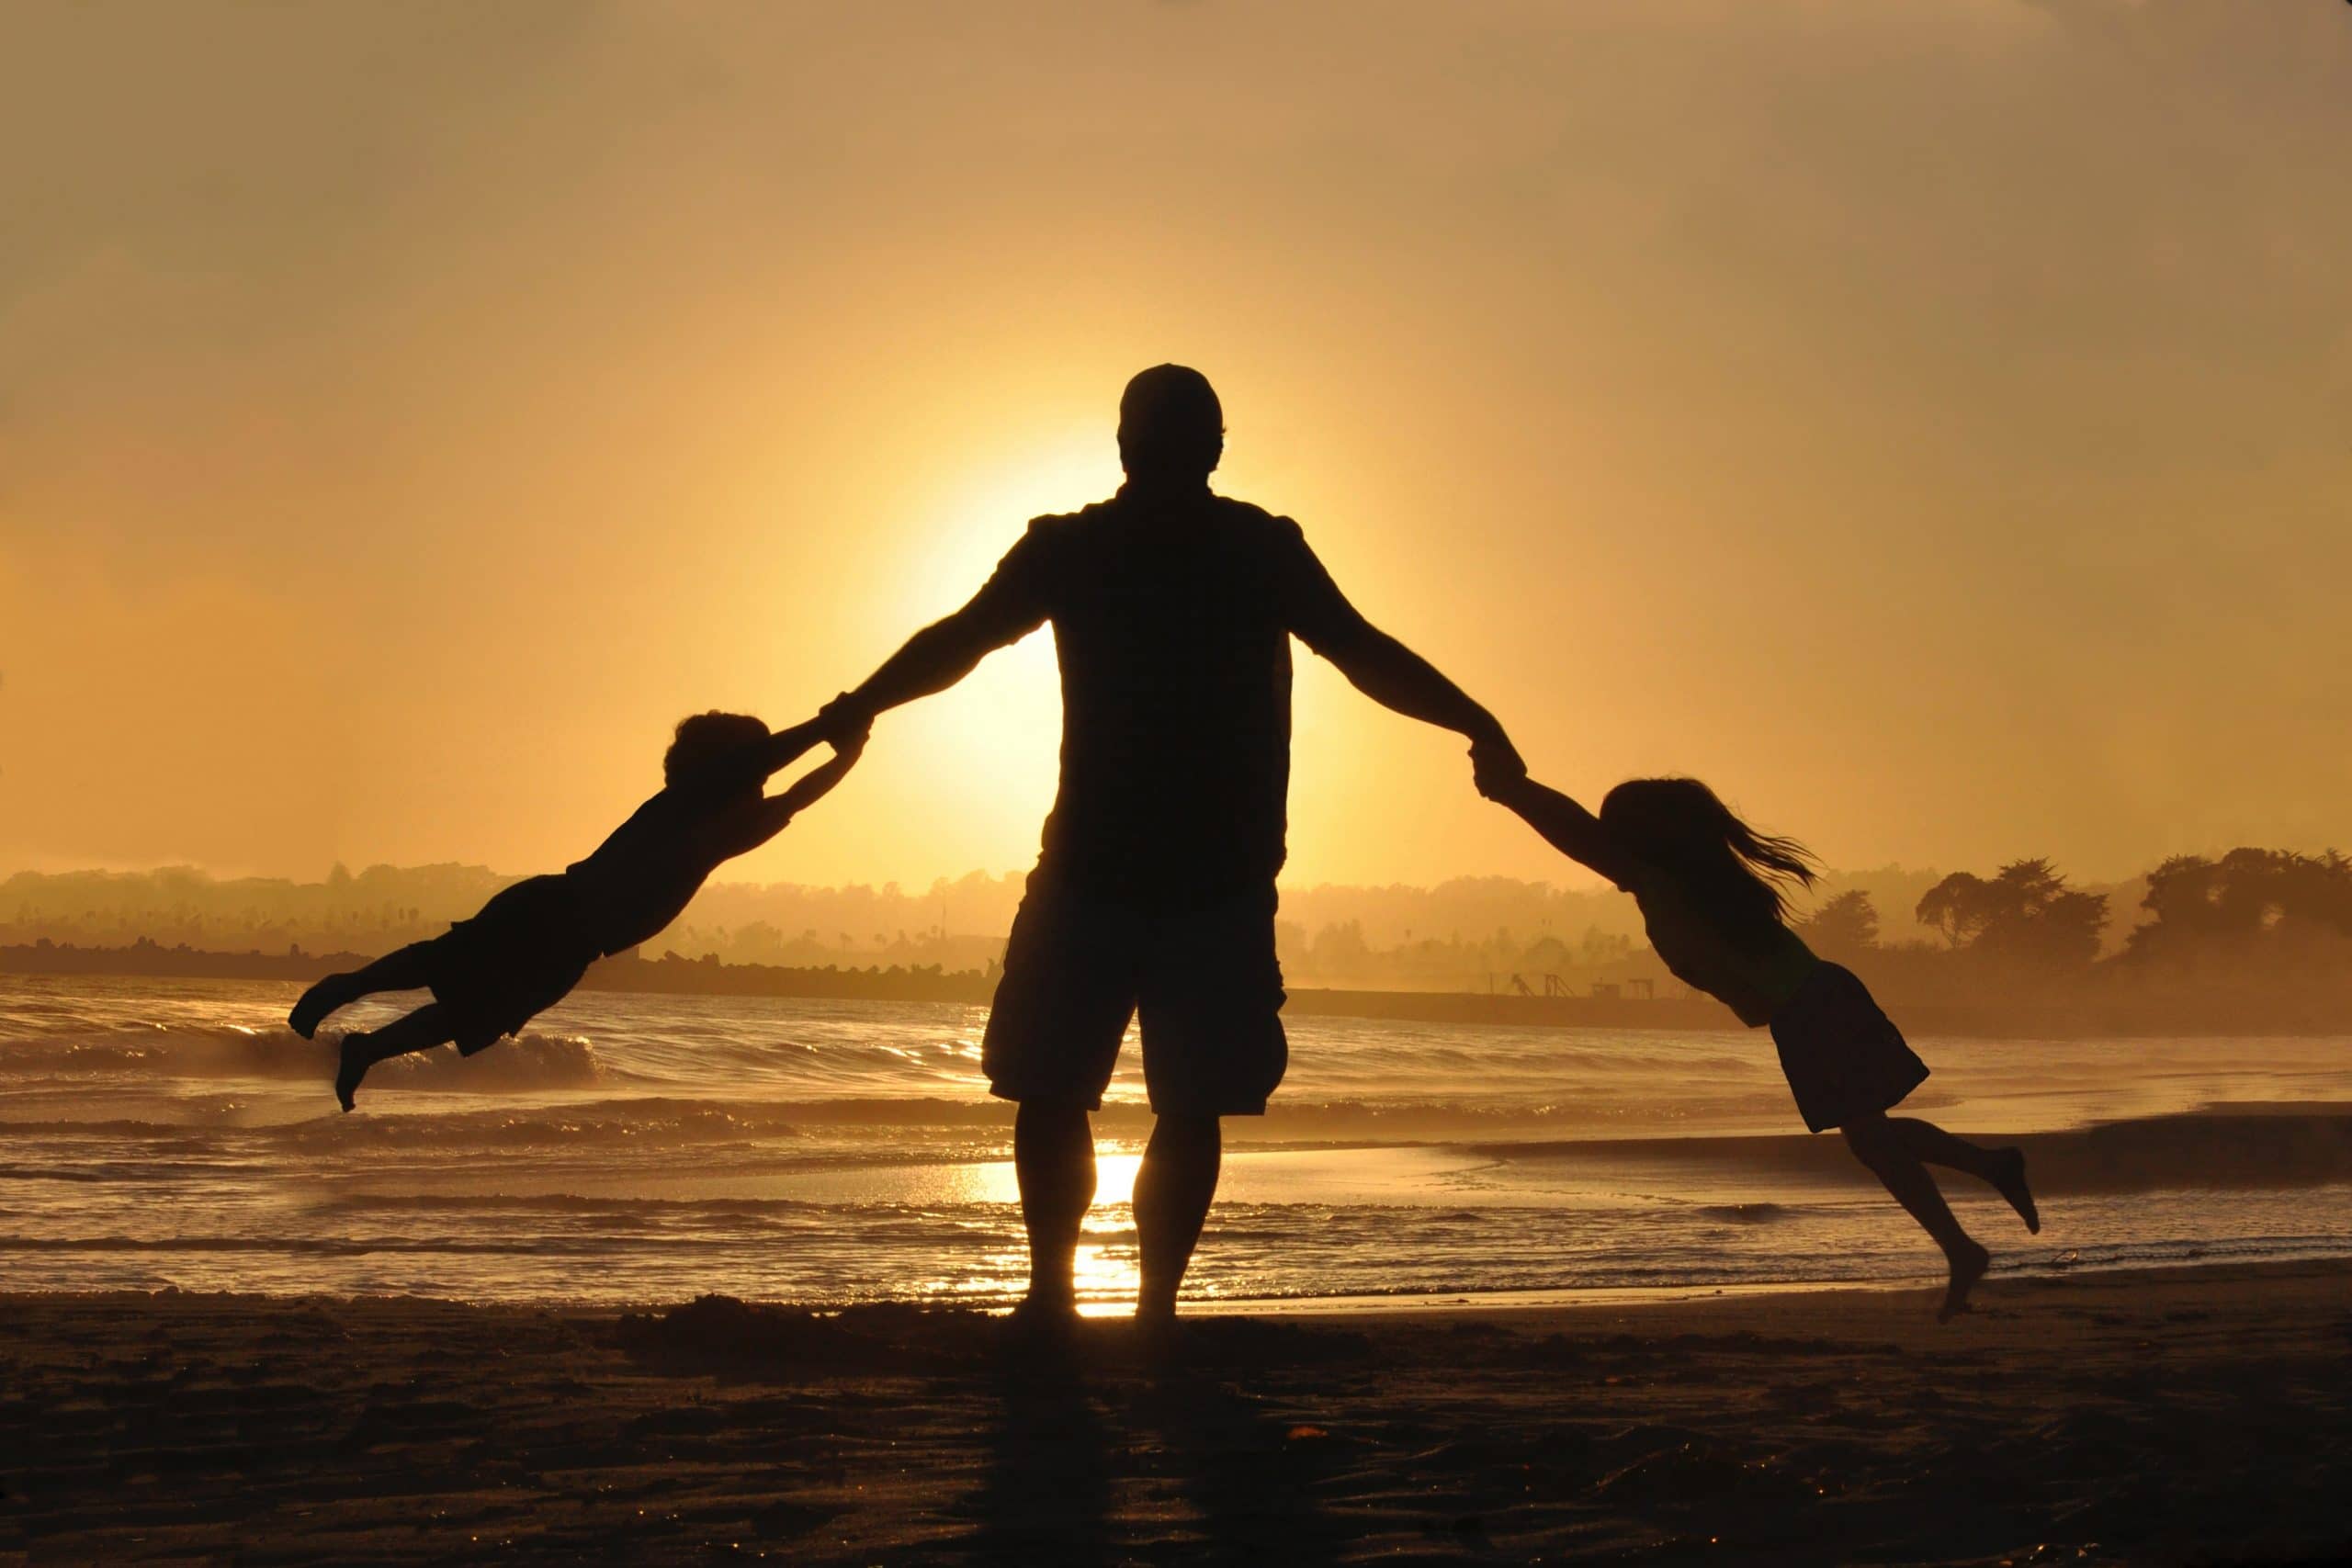 work-life balance - Dad swinging kids on a beach with sunset behind - Avoid being a Deadbeat Dad